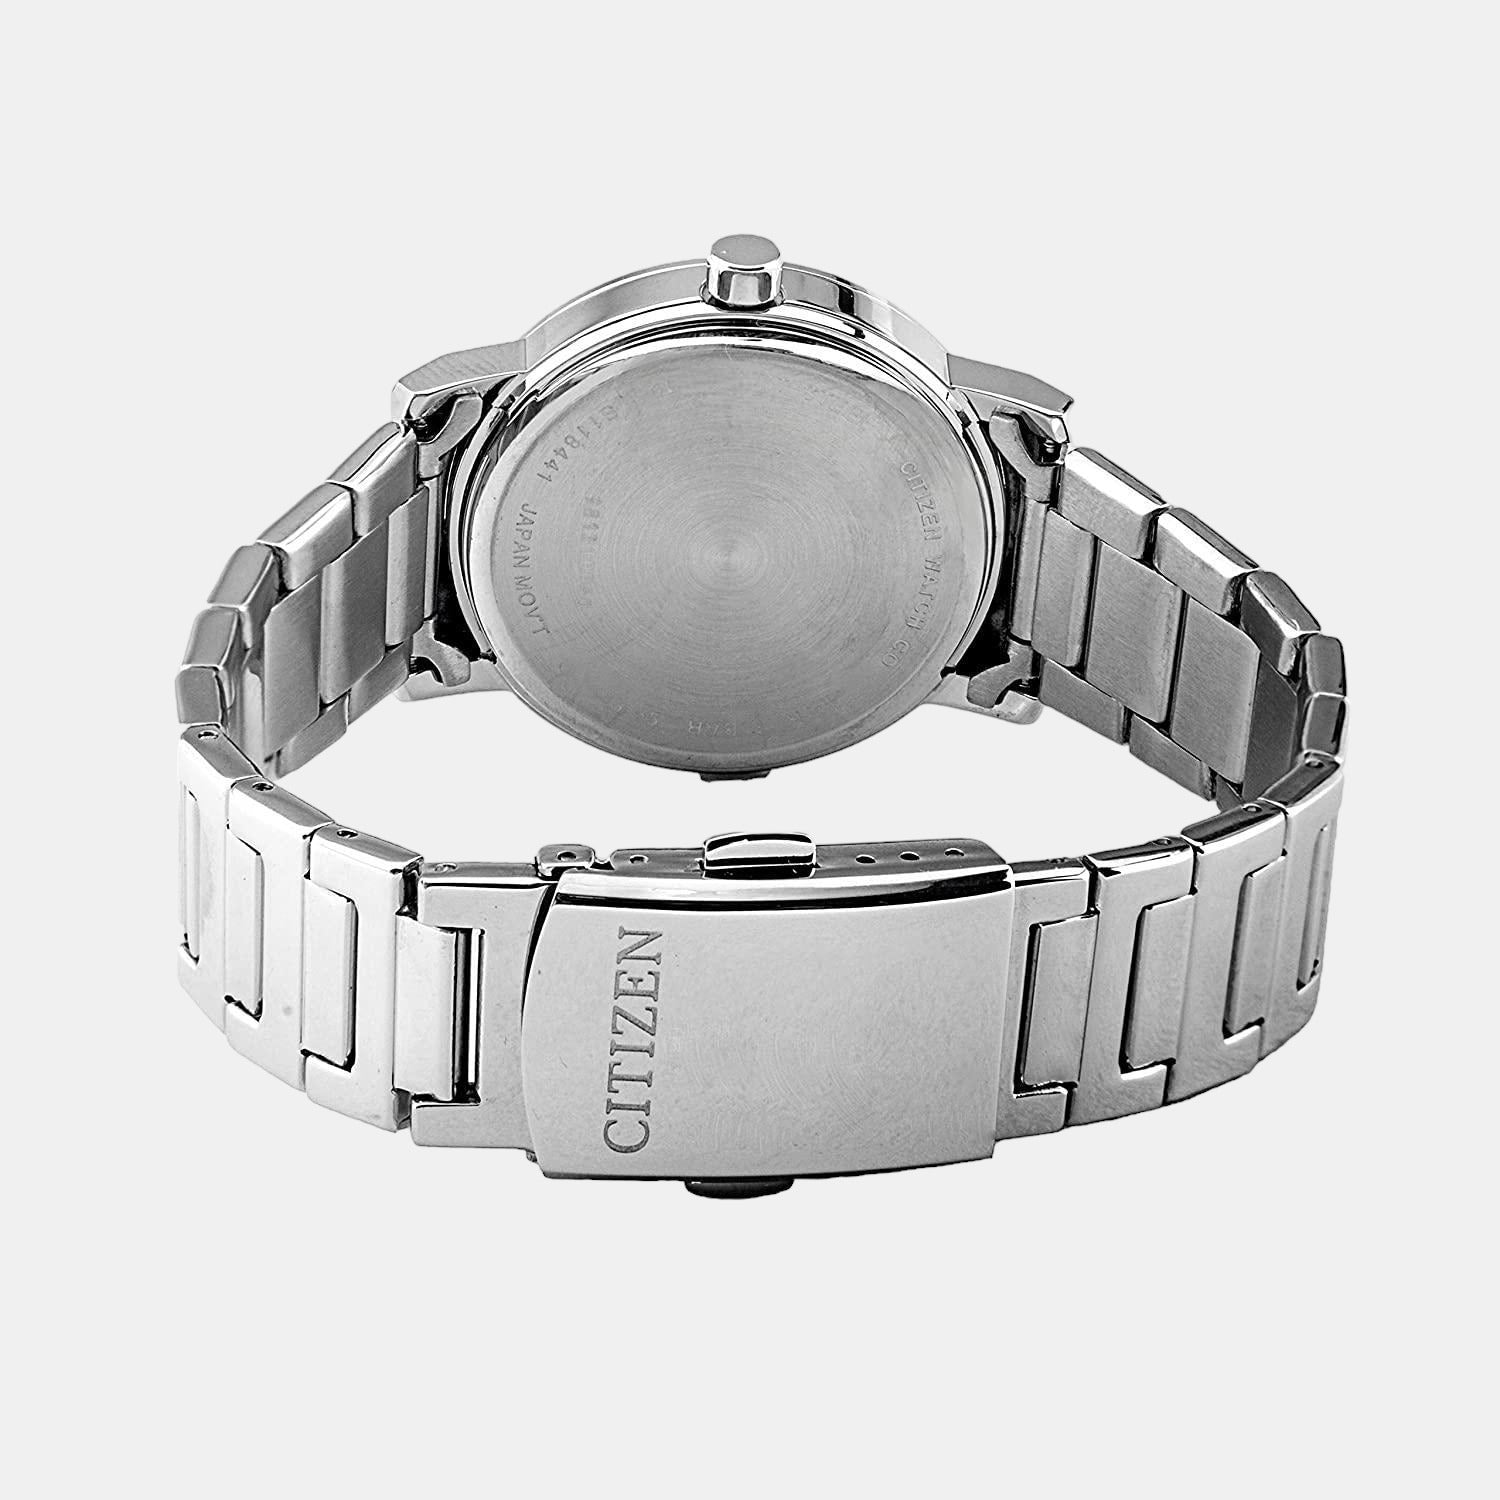 citizen-stainless-steel-white-analog-female-watch-eq9060-53a